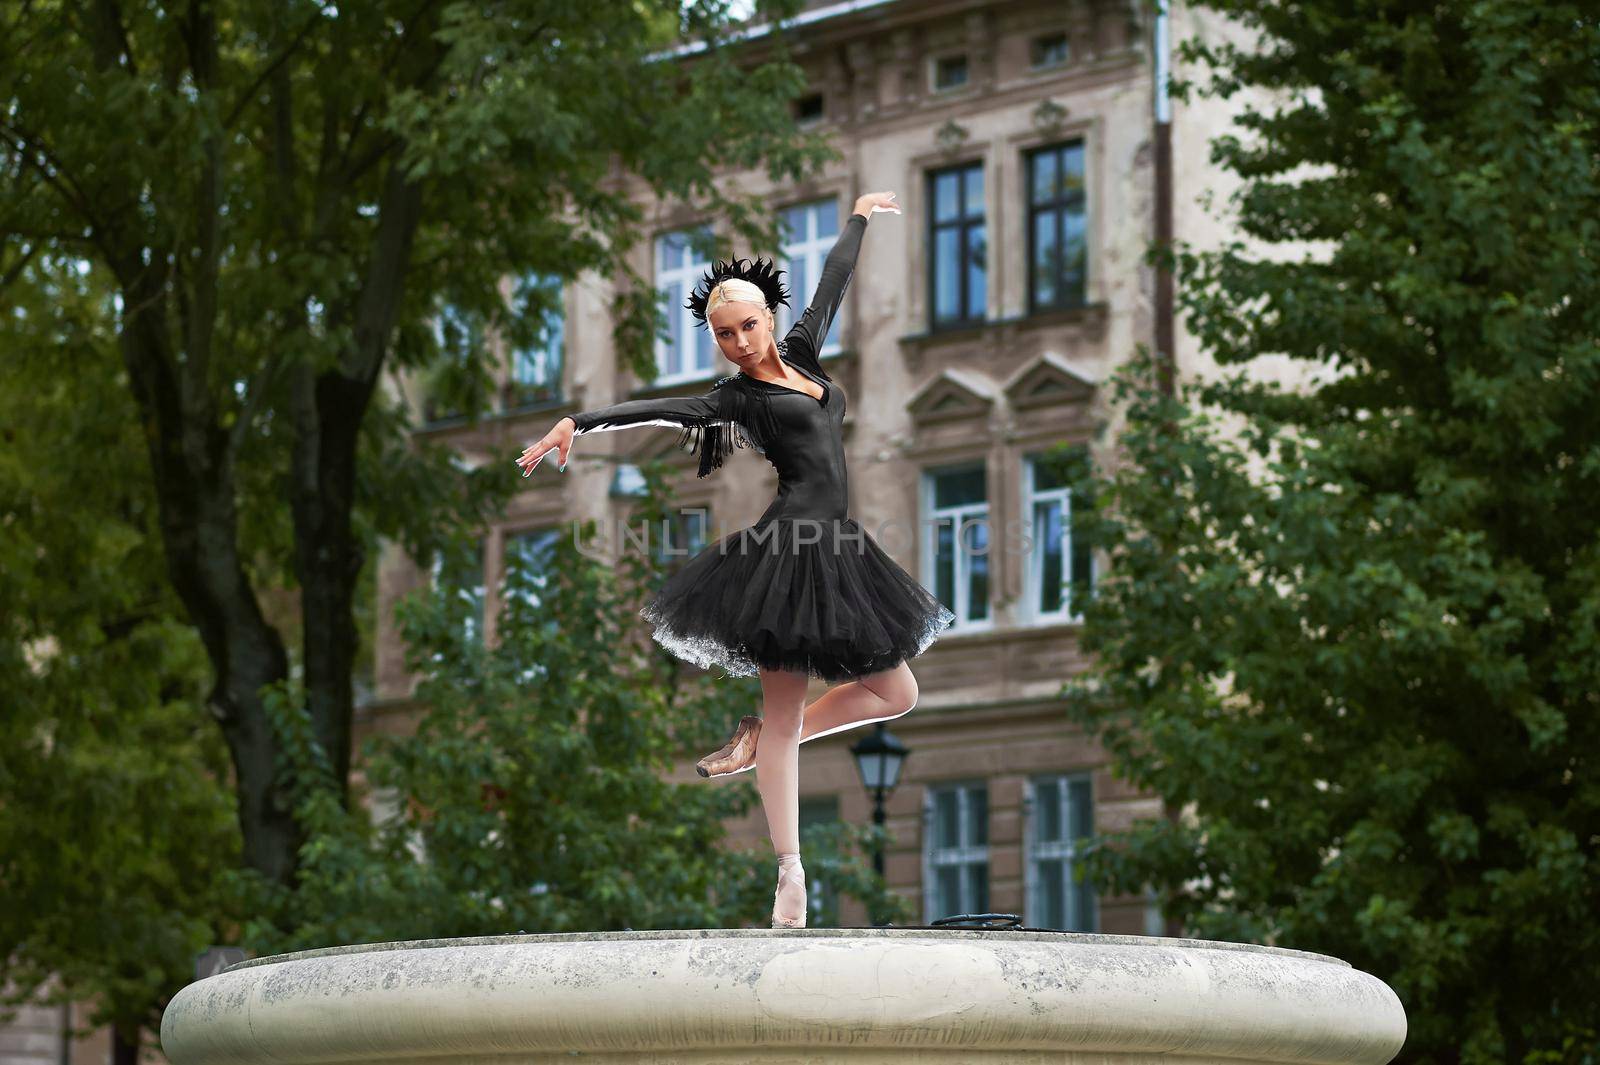 Horizontal shot of a professional ballerina wearing black dress dancing outdoors in the street of an old town.